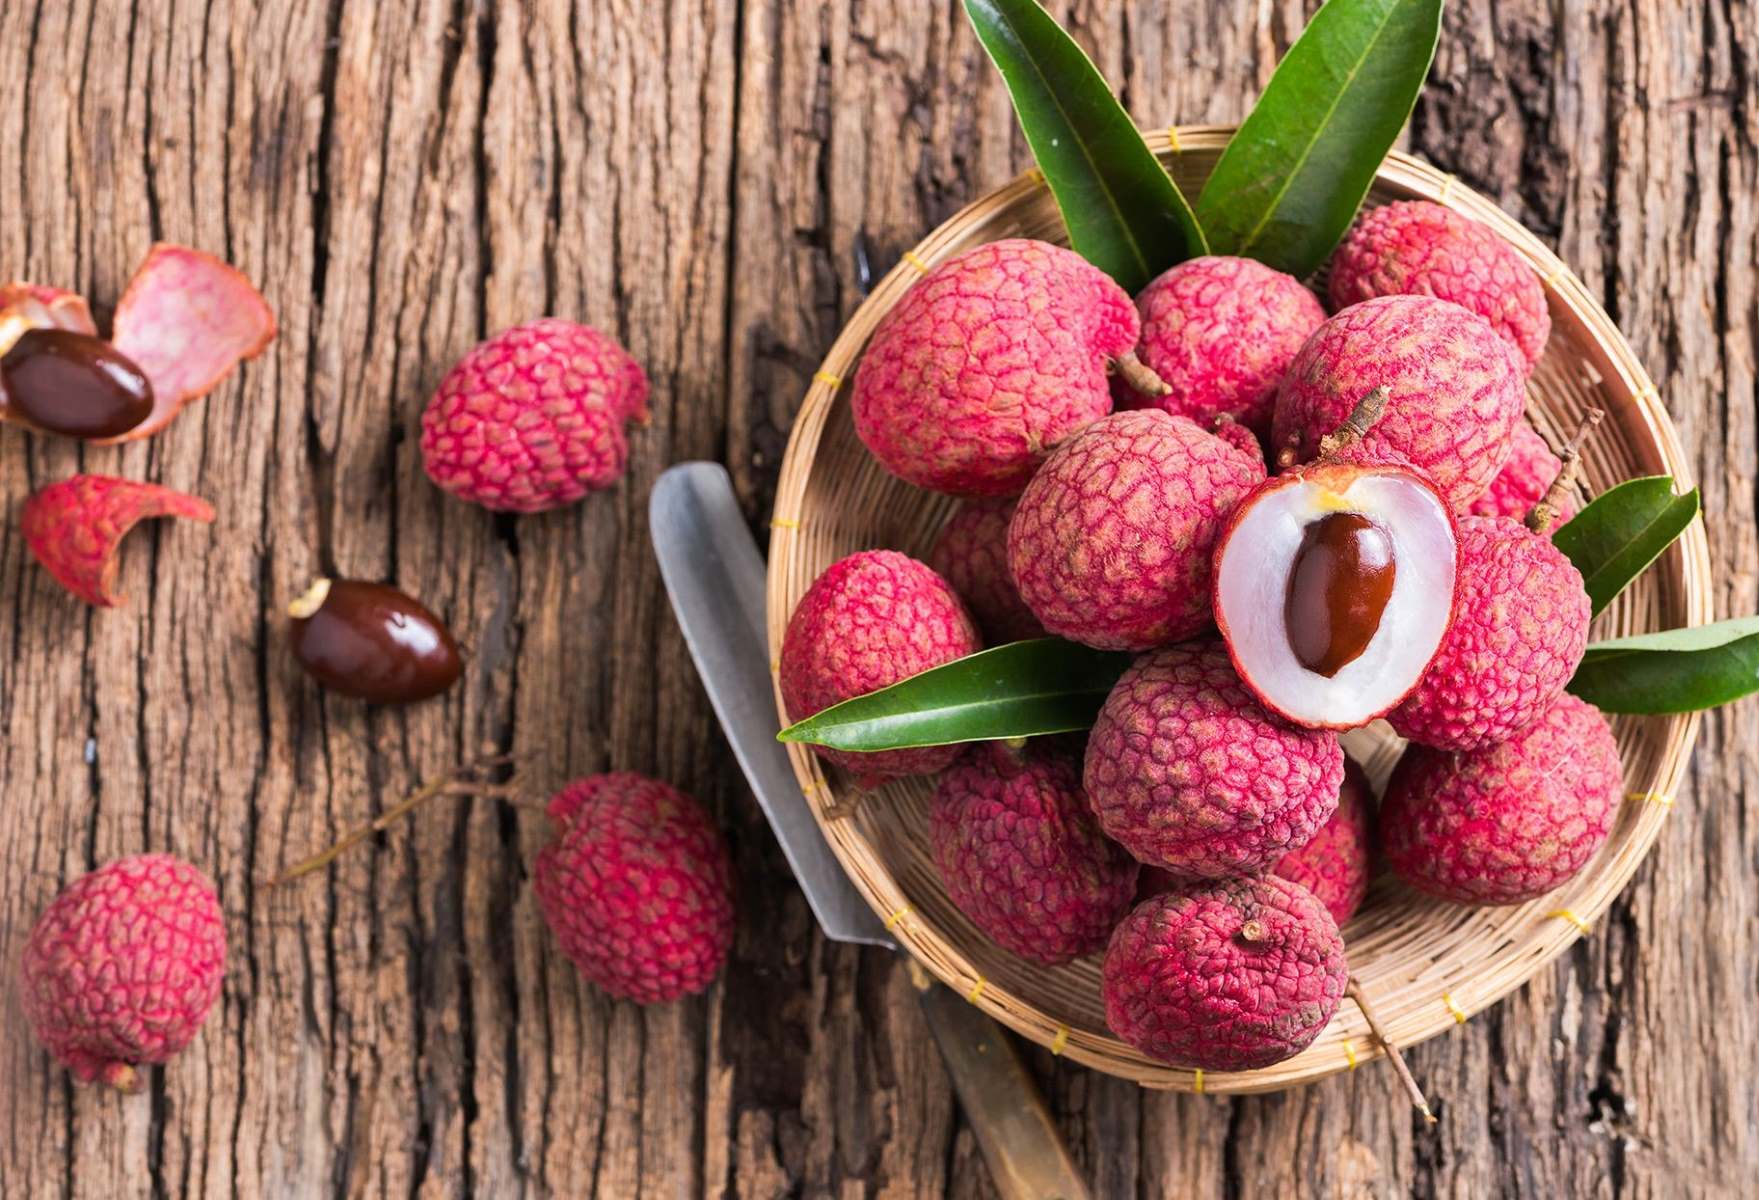 How To Describe The Taste Of Lychee